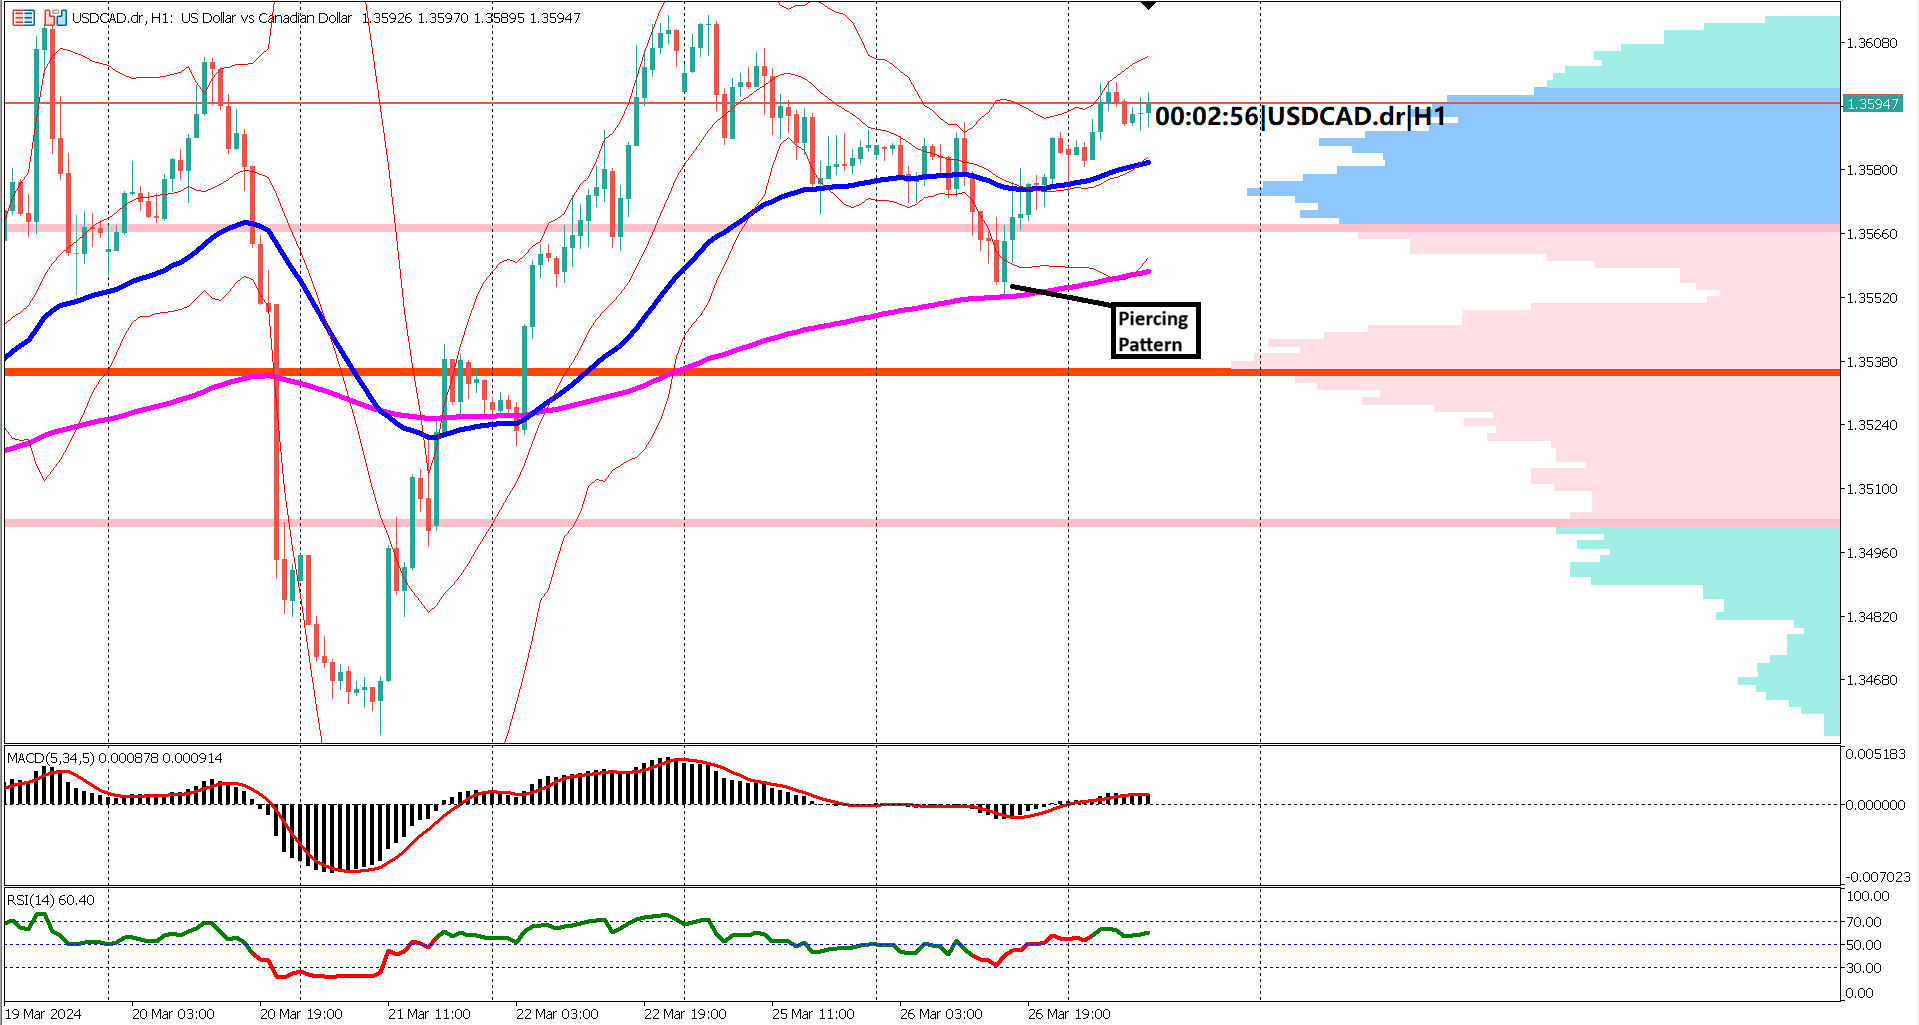 USDCAD Surges Amidst USD Strength and Declining Oil Prices